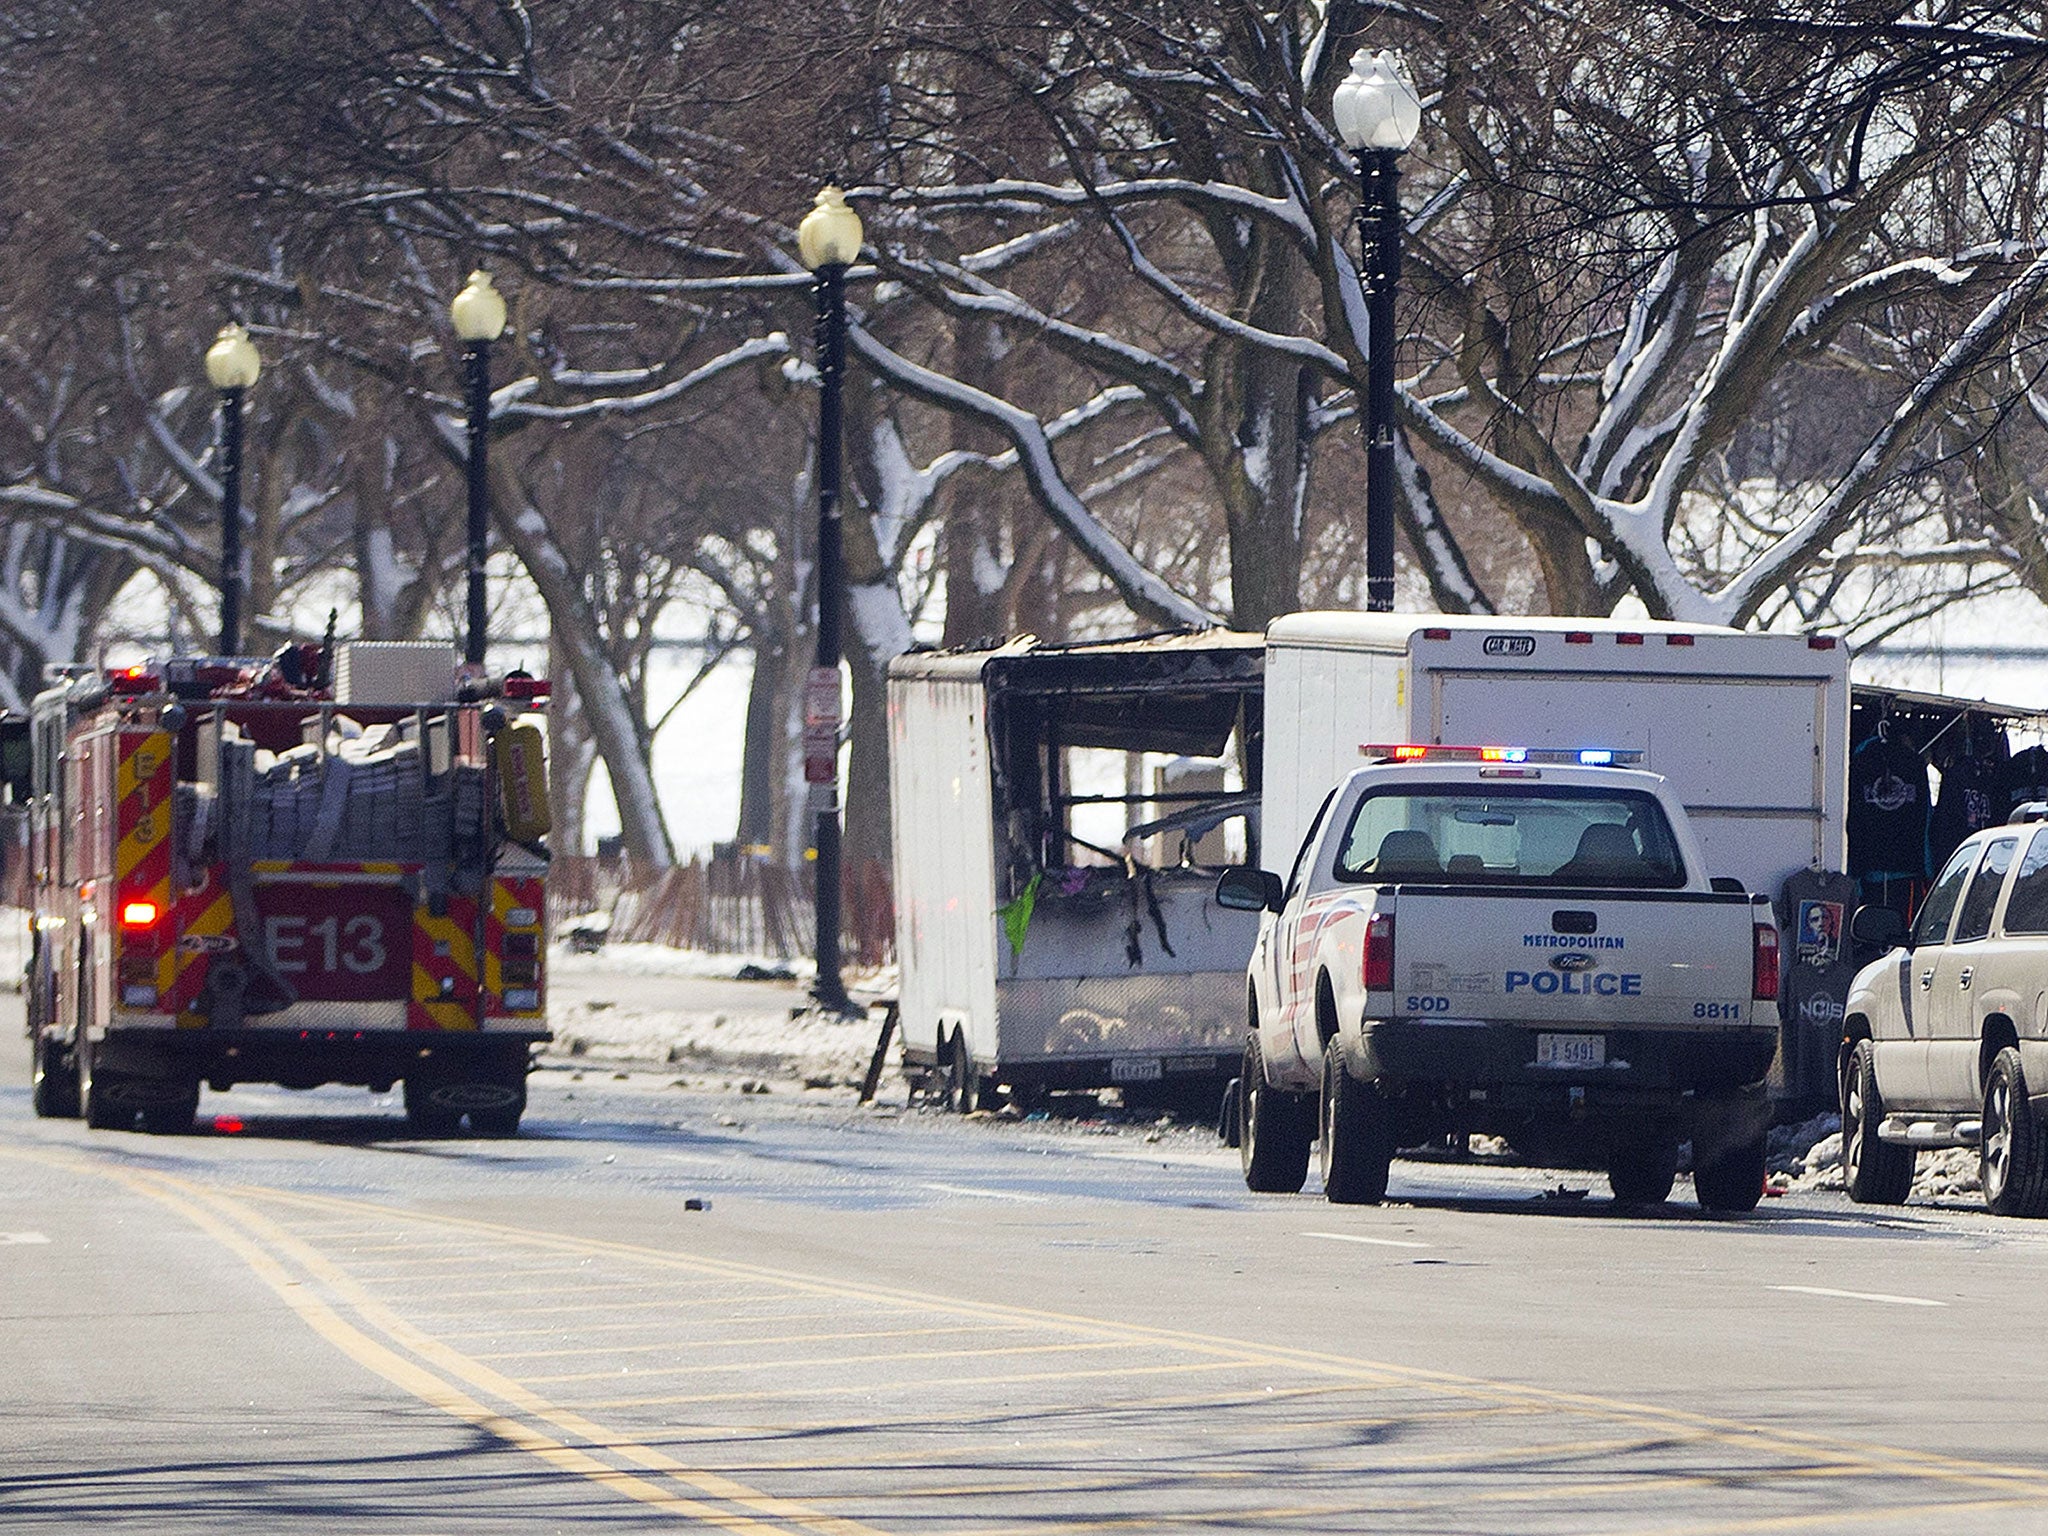 Police and fire vehicles are seen along 15th street NW near the White House, near a vendor cart that caught on fire Saturday, March 7, 2015 in Washington.